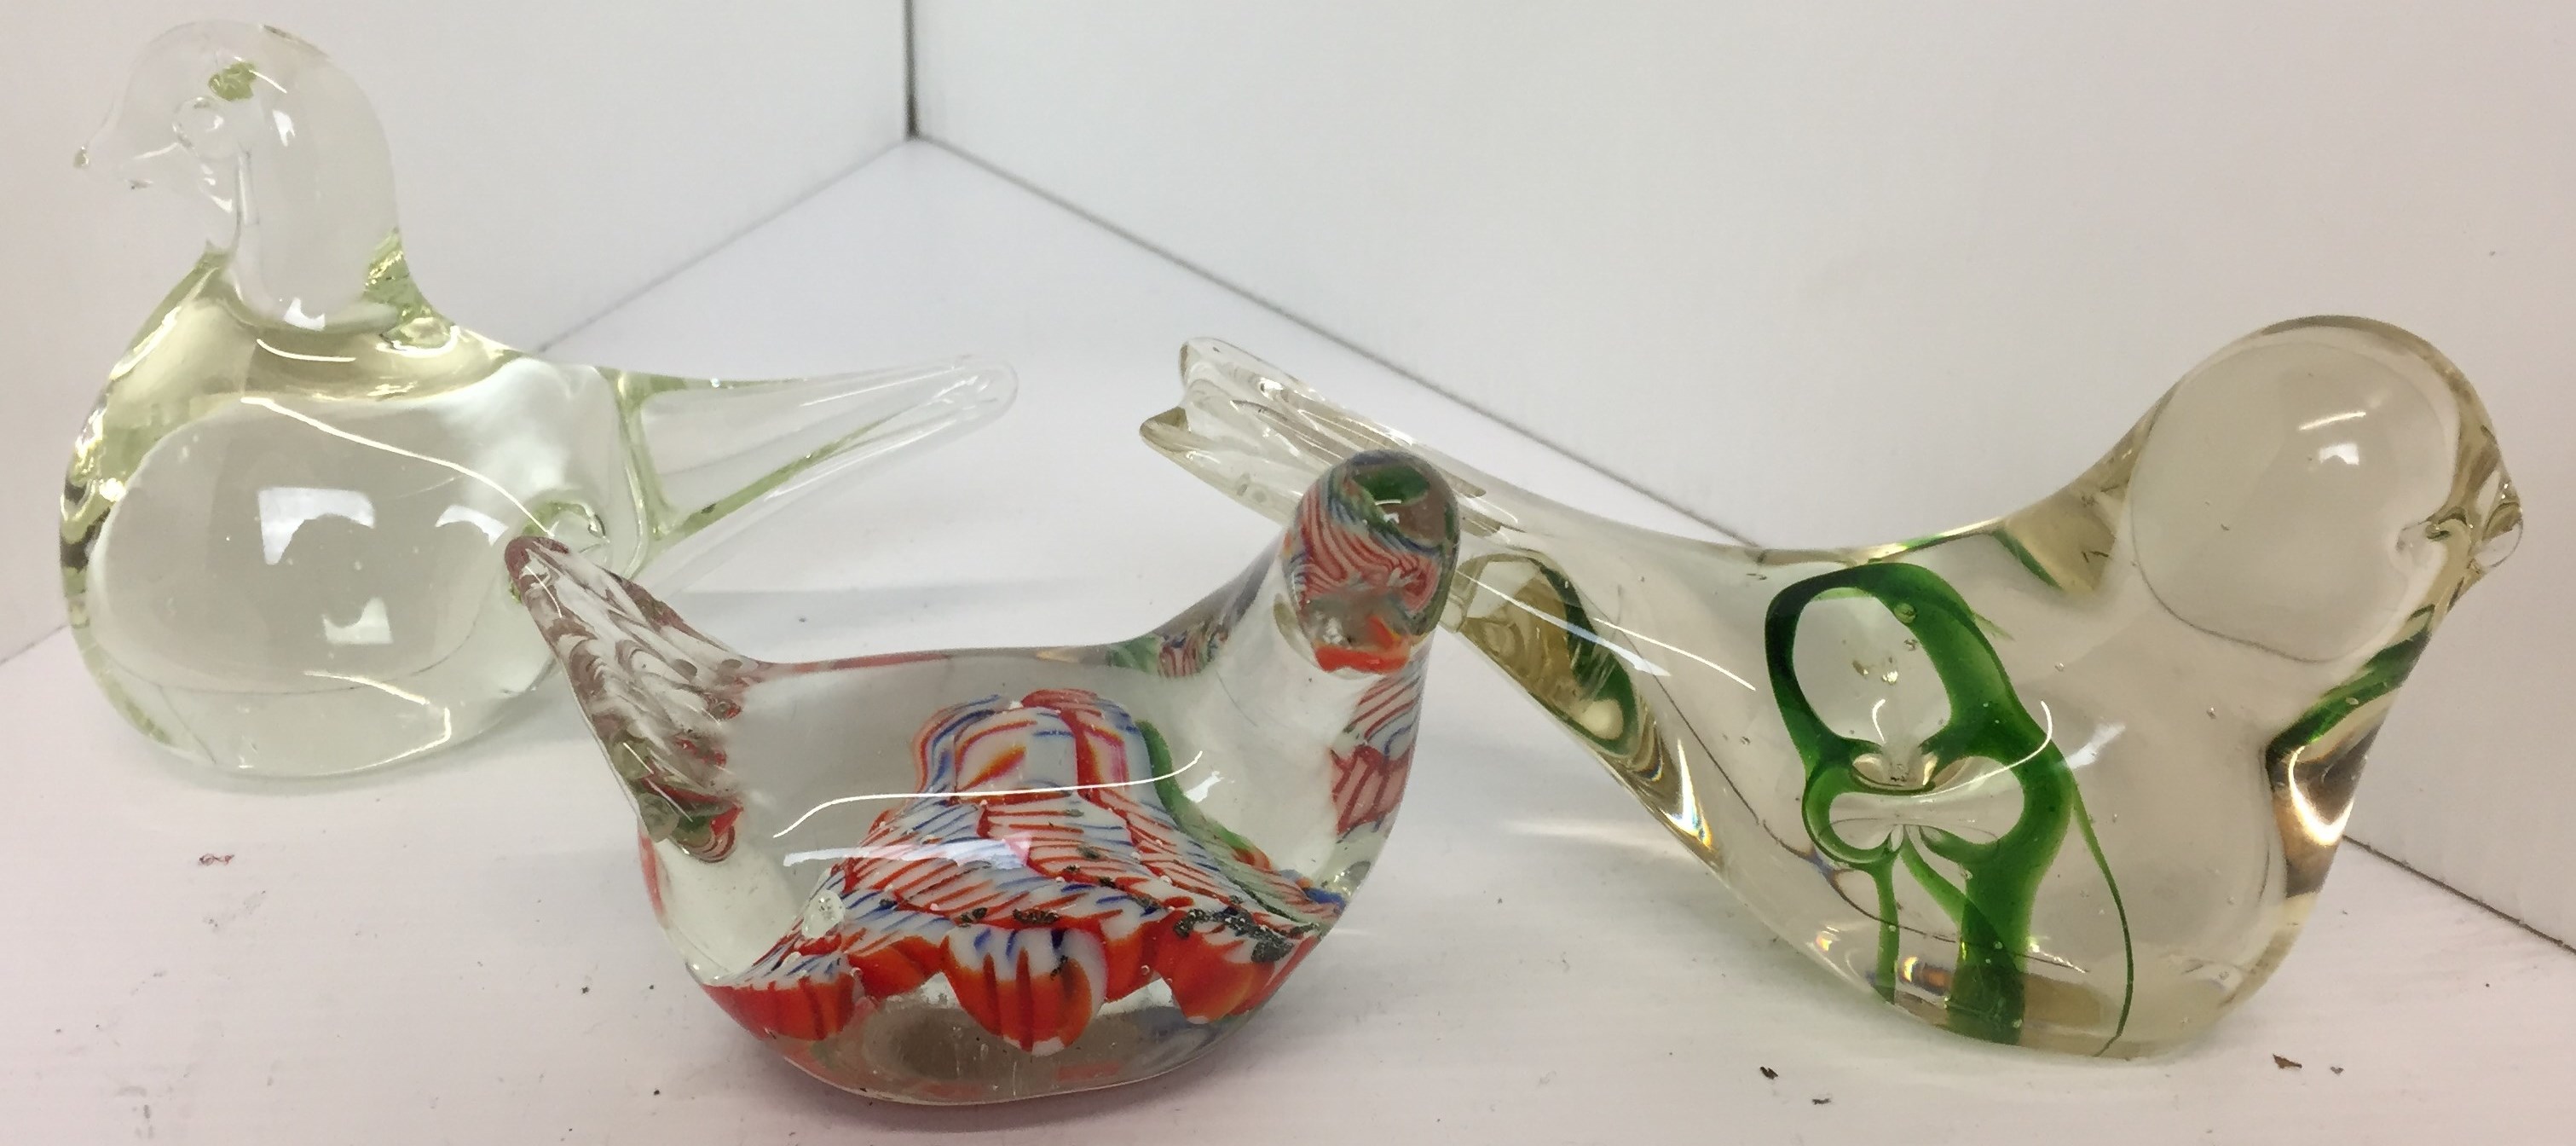 Eleven glass paperweights - ten birds from 4cm to 8cm high and one cat 5cm high (Saleroom - Image 2 of 4